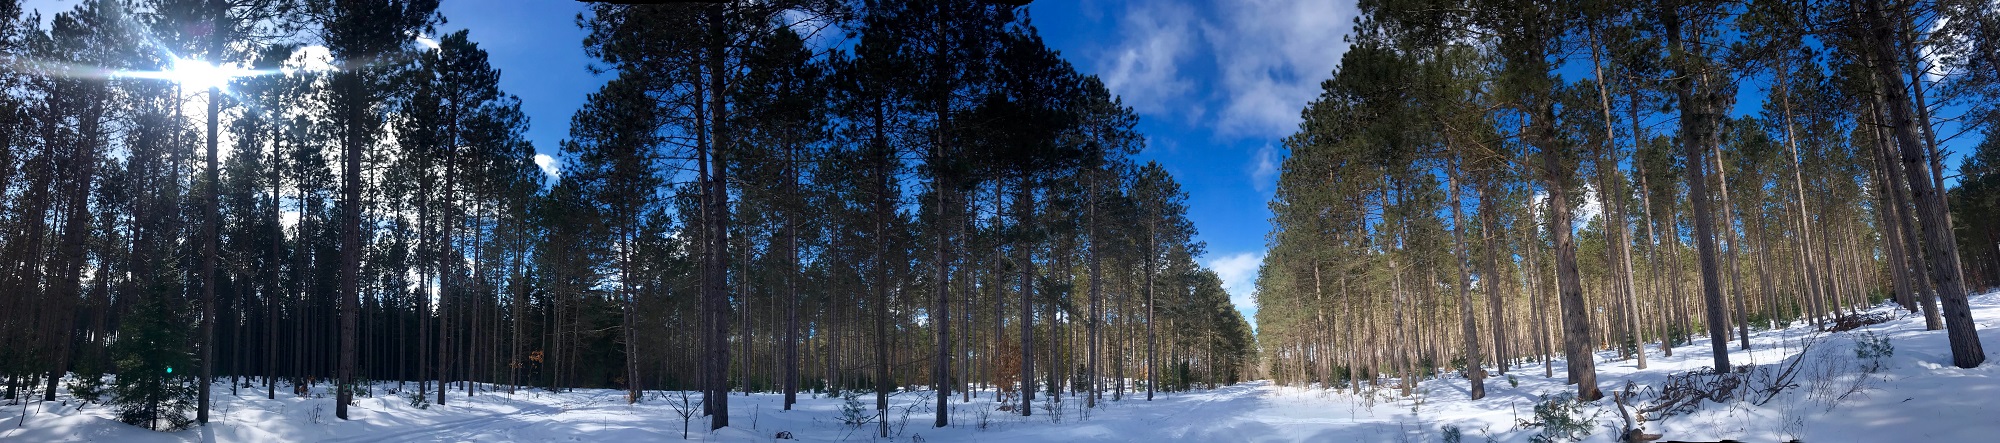 County Forest Winter Pano 1.jpg